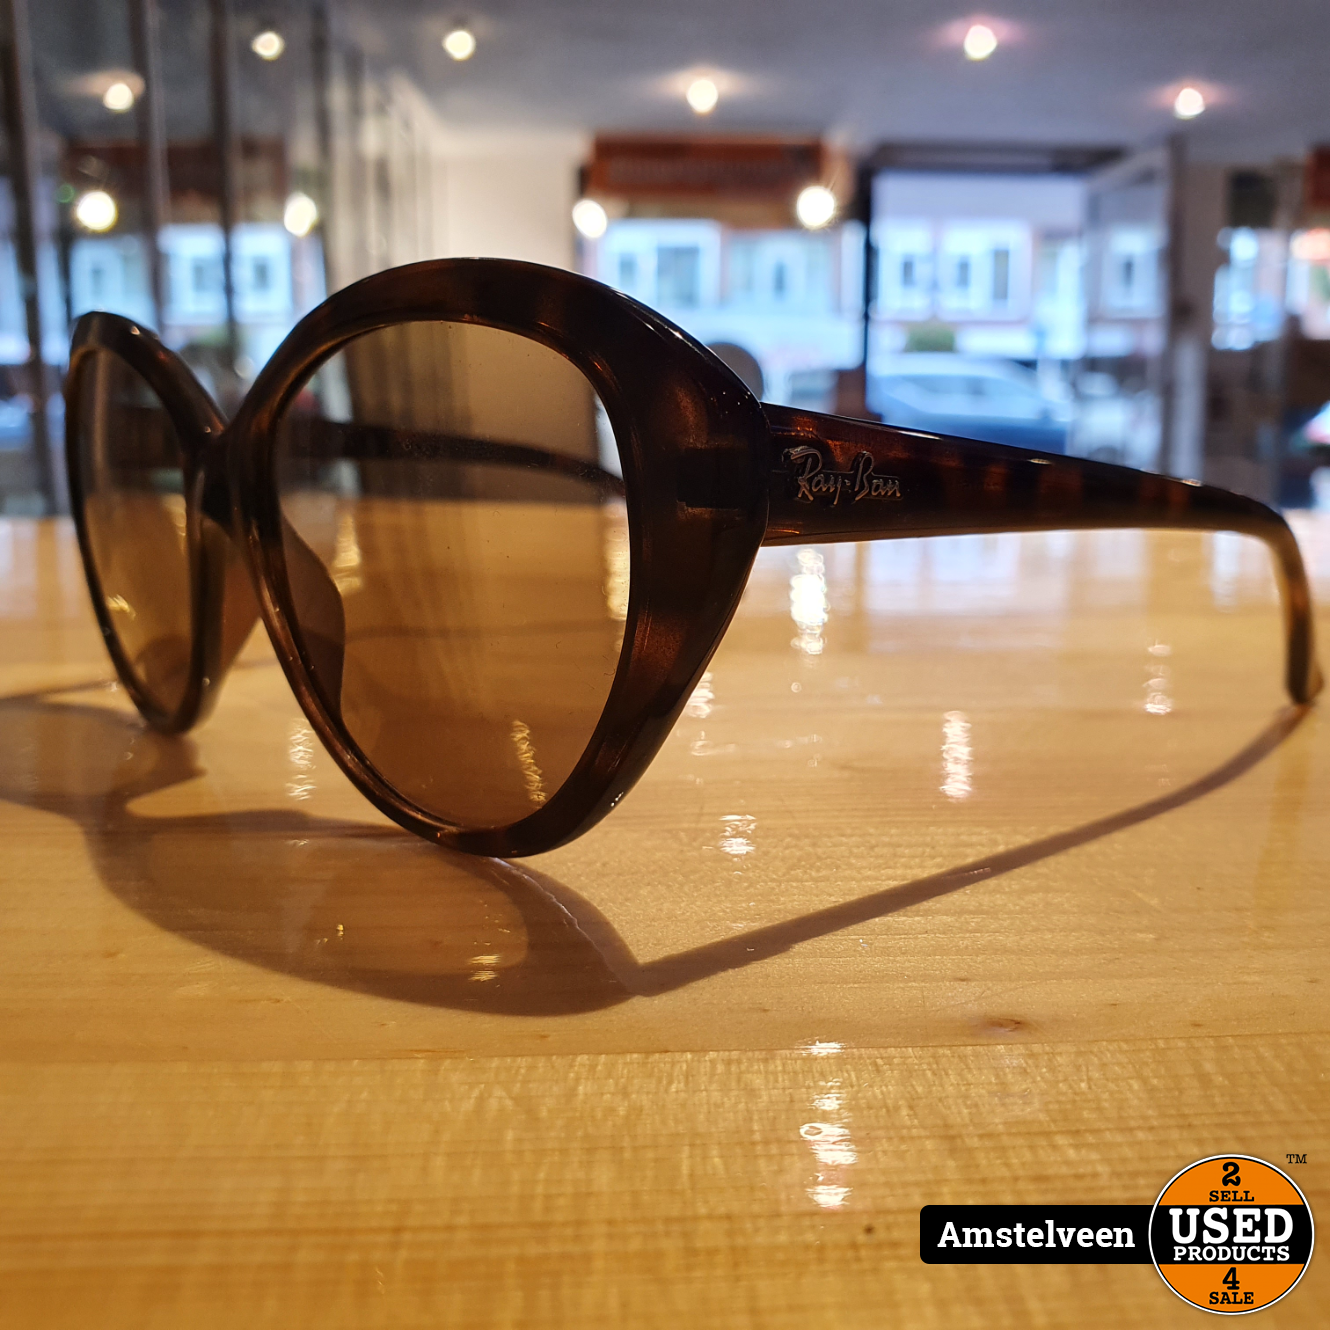 knuffel Vakantie Vervuild Ray-Ban RB-4163 710/51 2N Dames Zonnebril (Dead Stock) | Excl. Koker - Used  Products Amstelveen